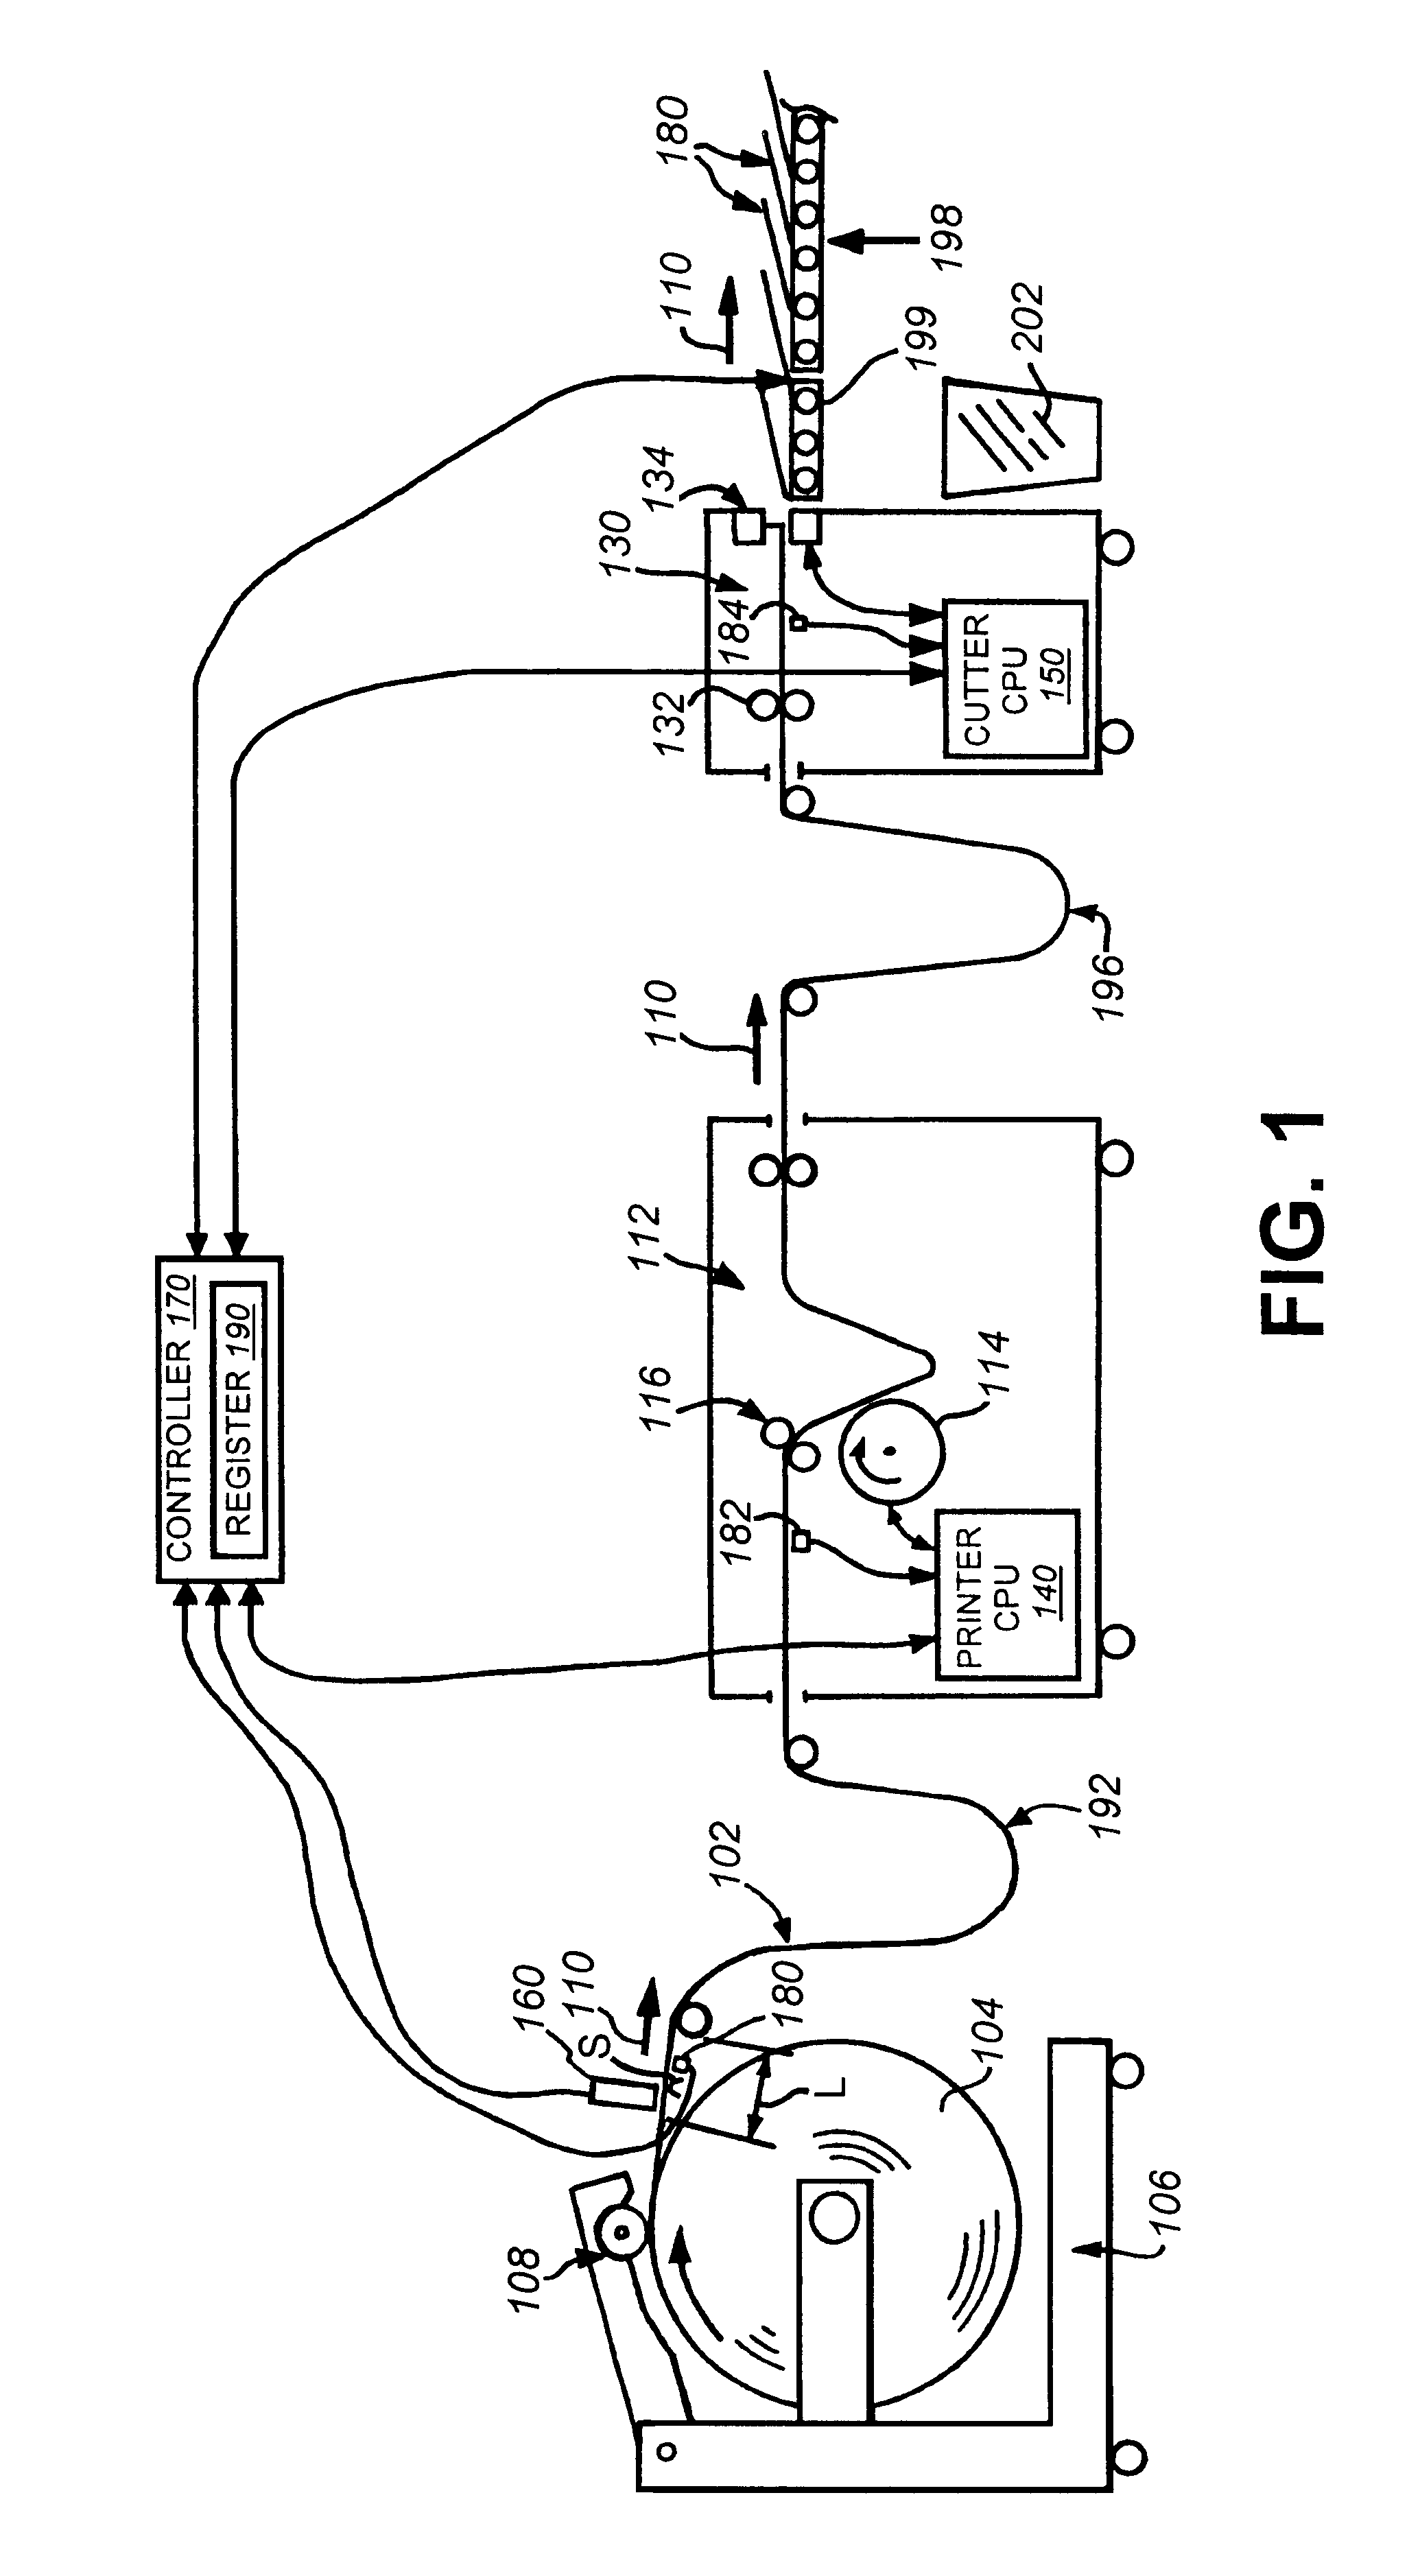 System and method for utilizing web from a roll having splices